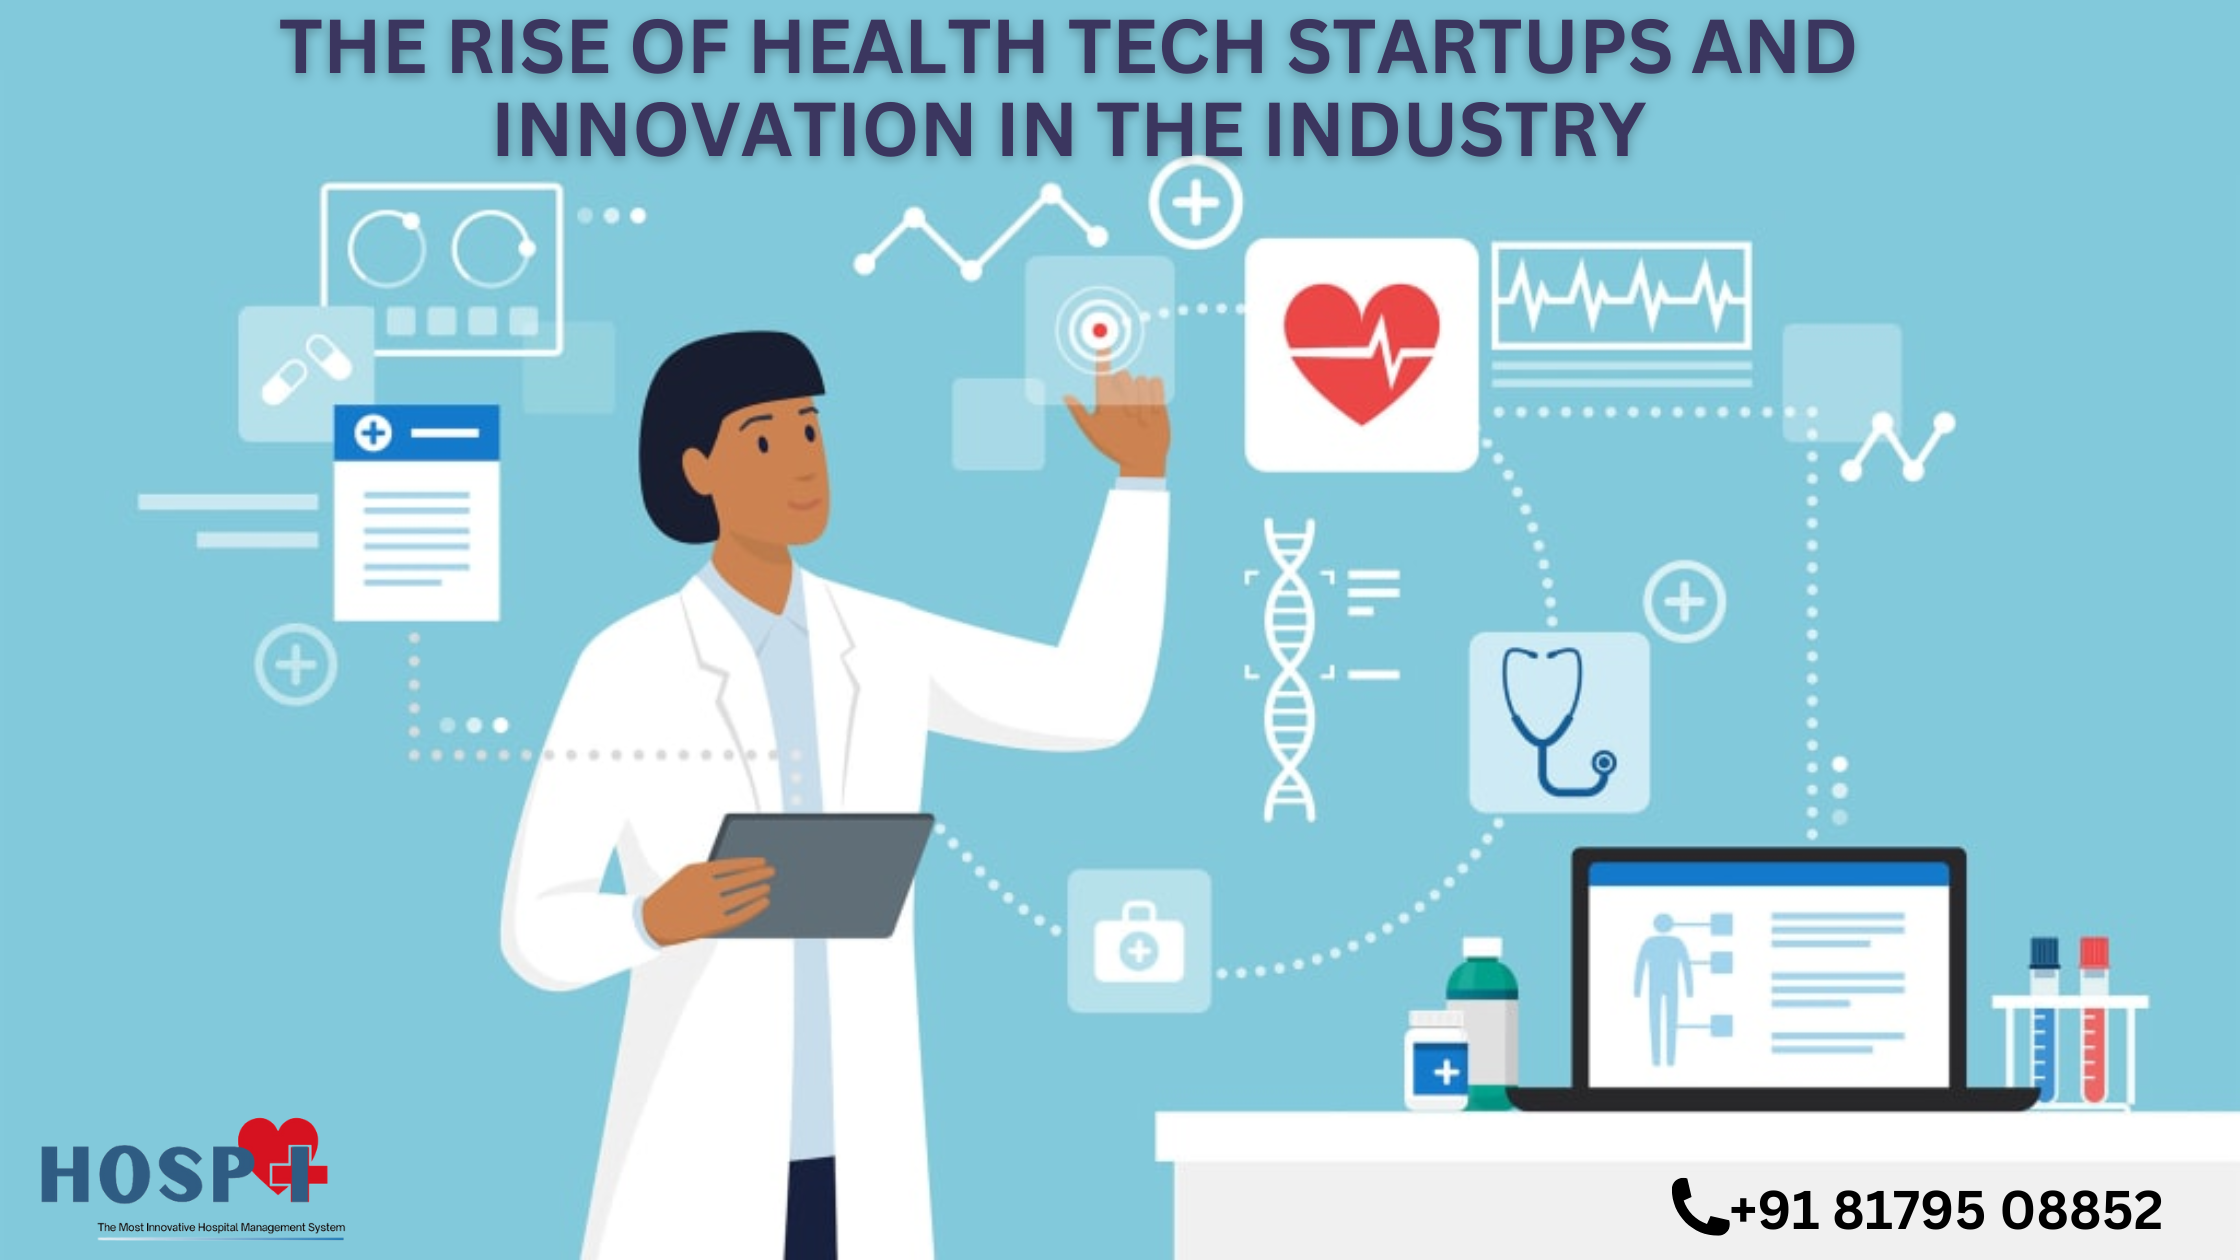 The Rise of Health Tech Startups and Innovation in the Industry